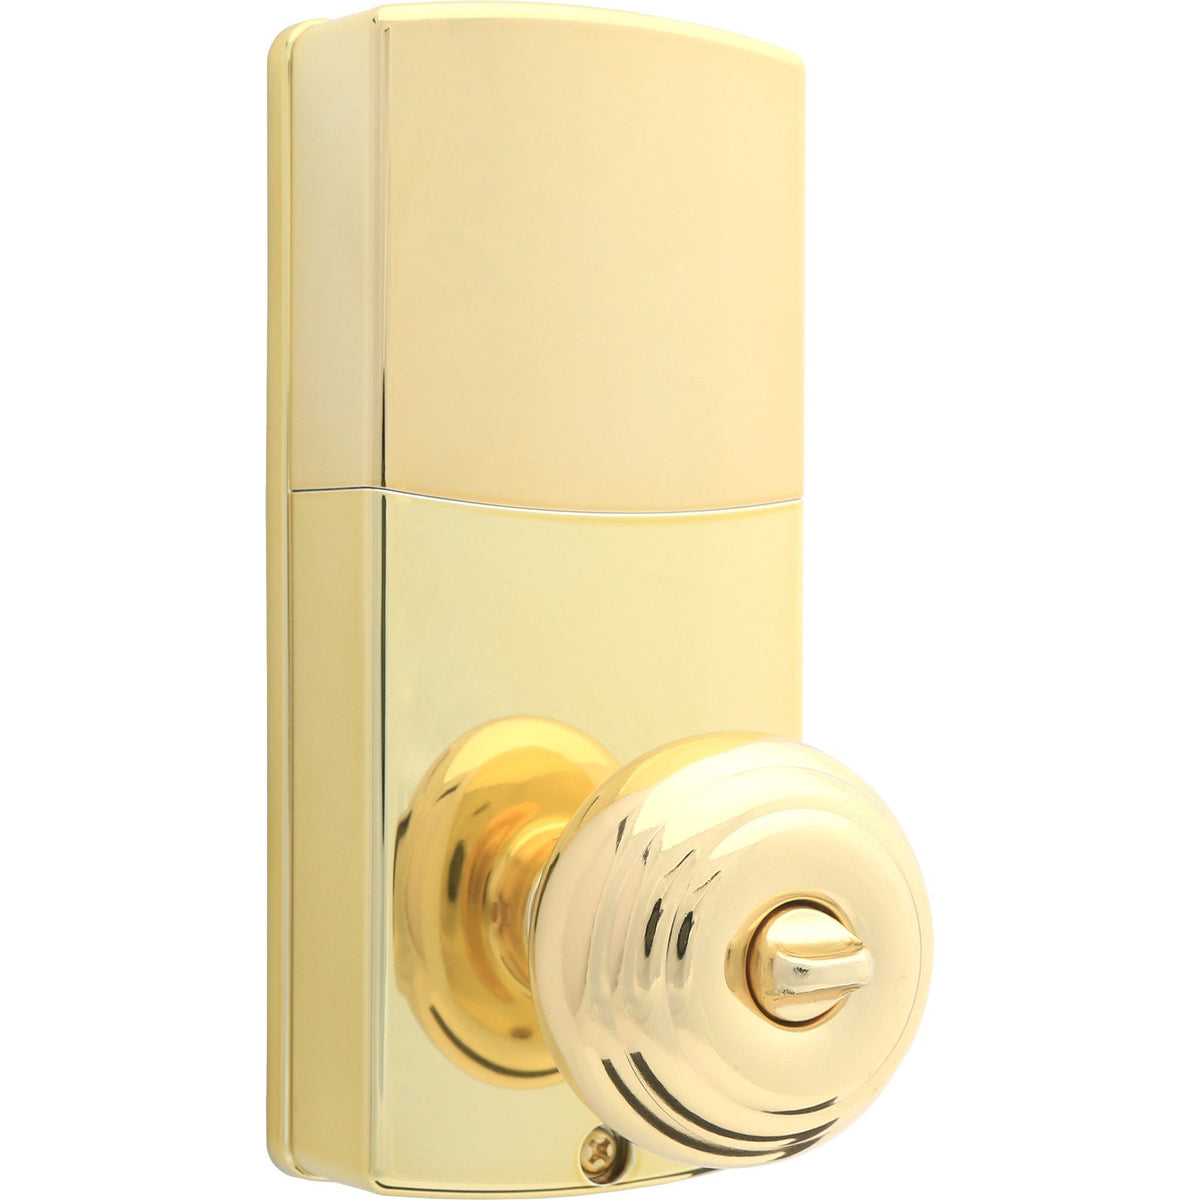 Honeywell 8732001 Electronic Entry Knob Door Lock with Keypad in Polished Brass Backside